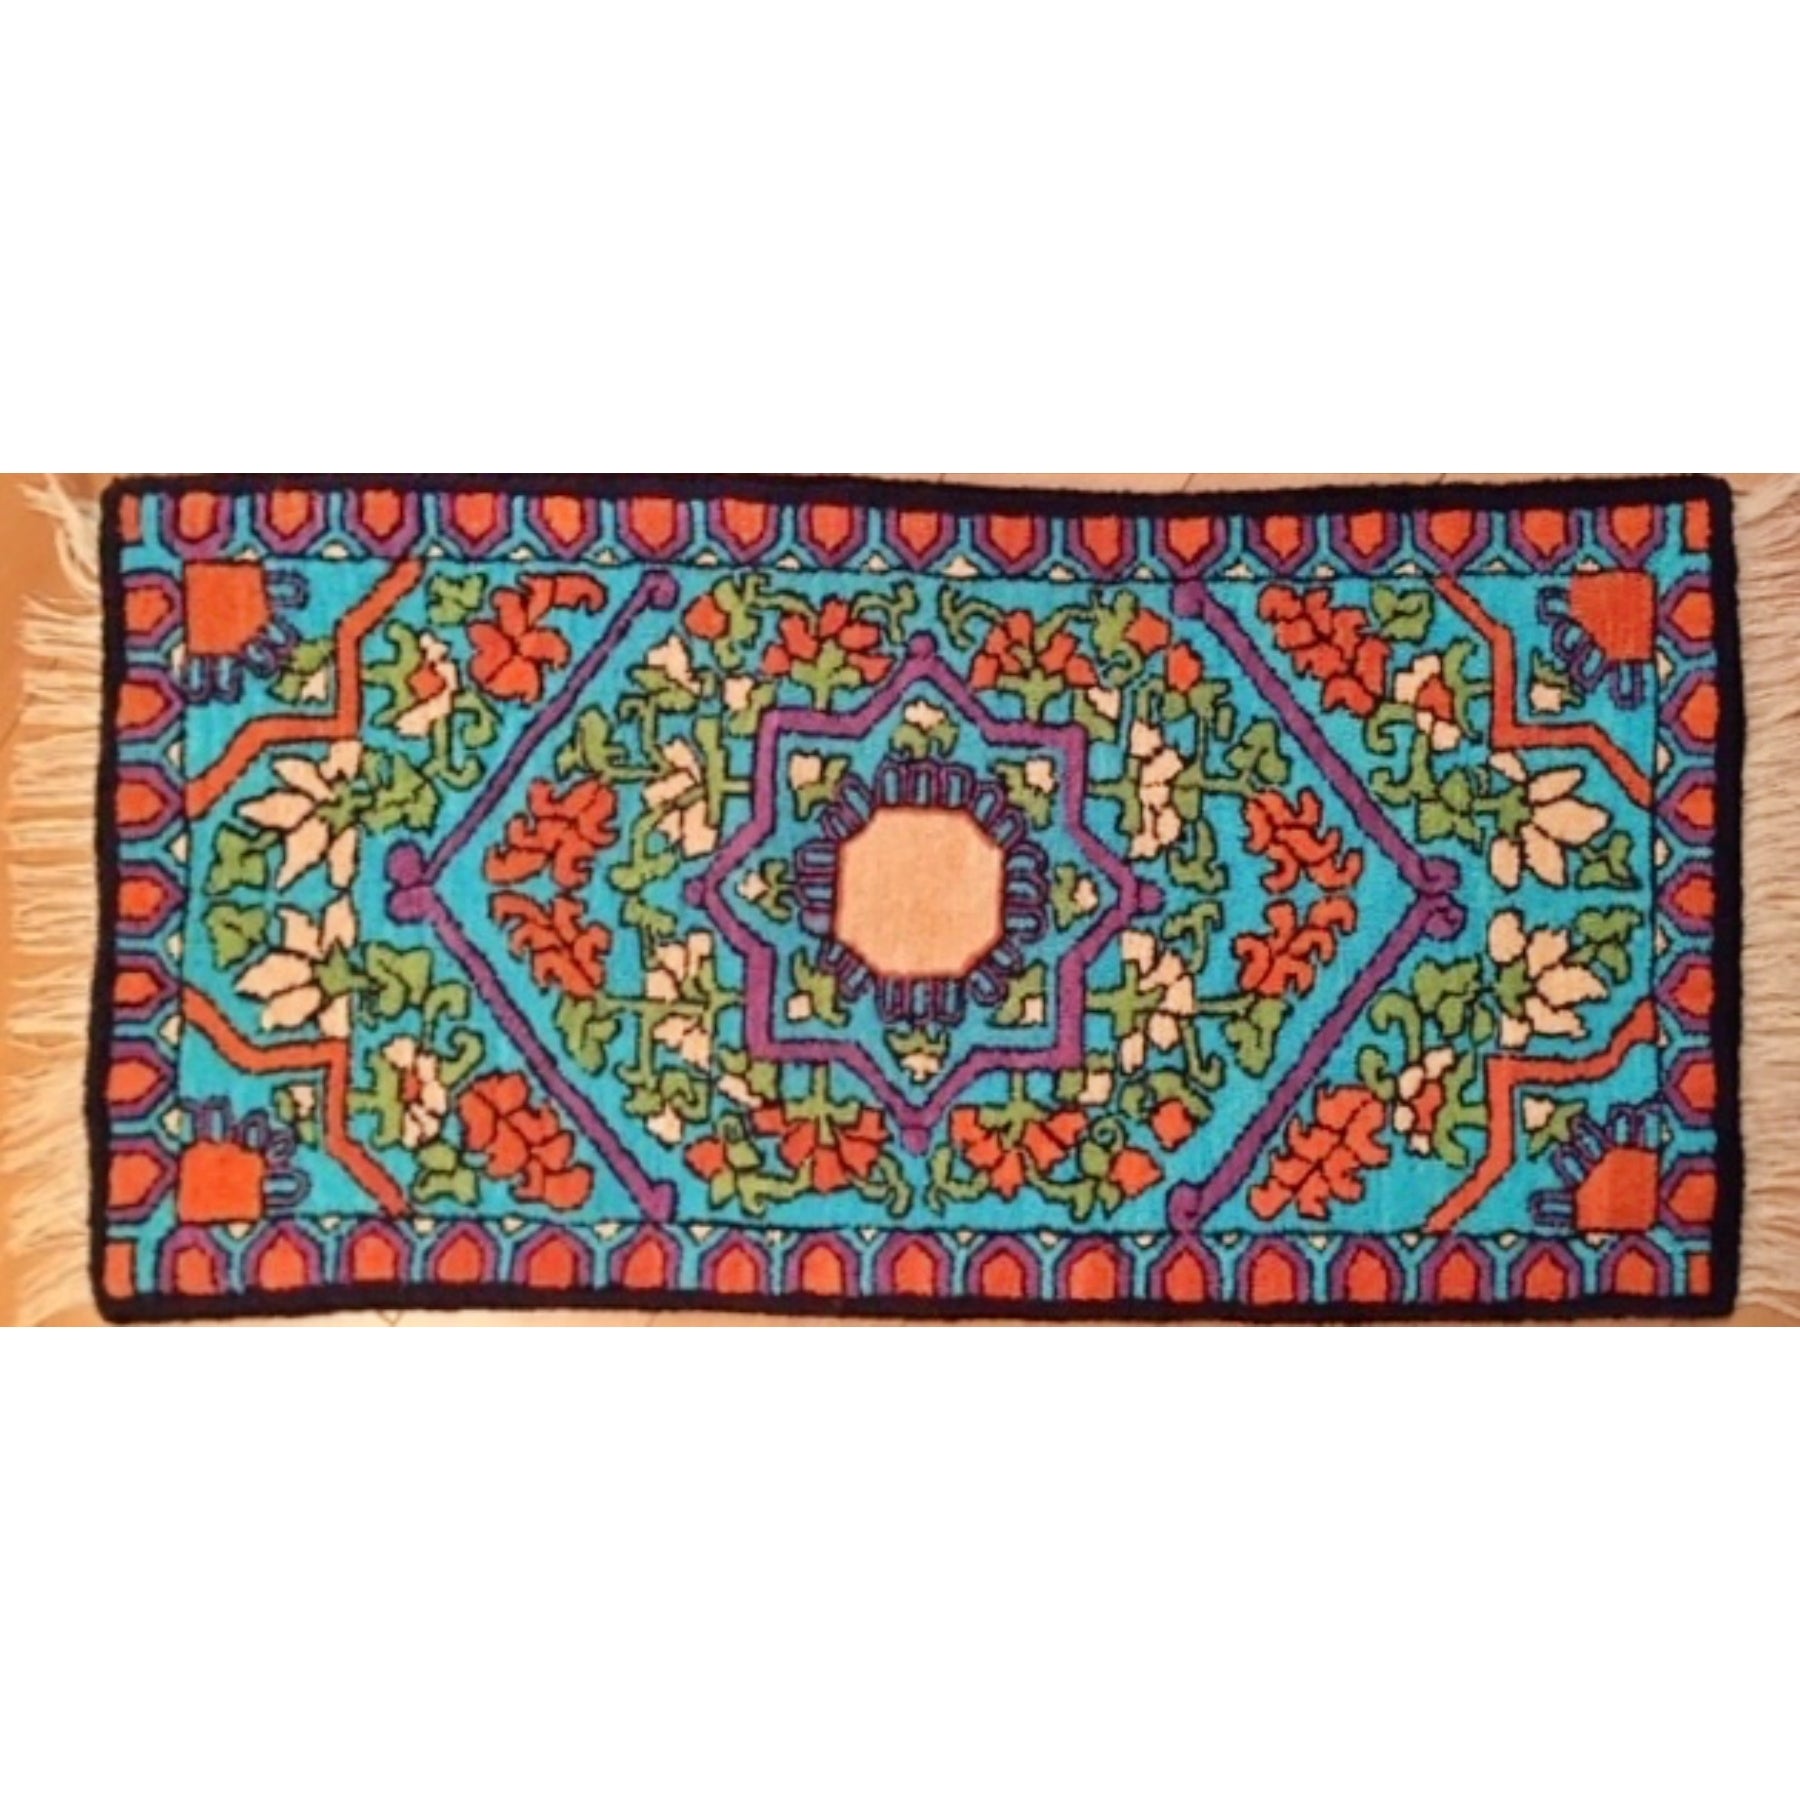 Zereh Center, rug hooked by Dianne Goodwin